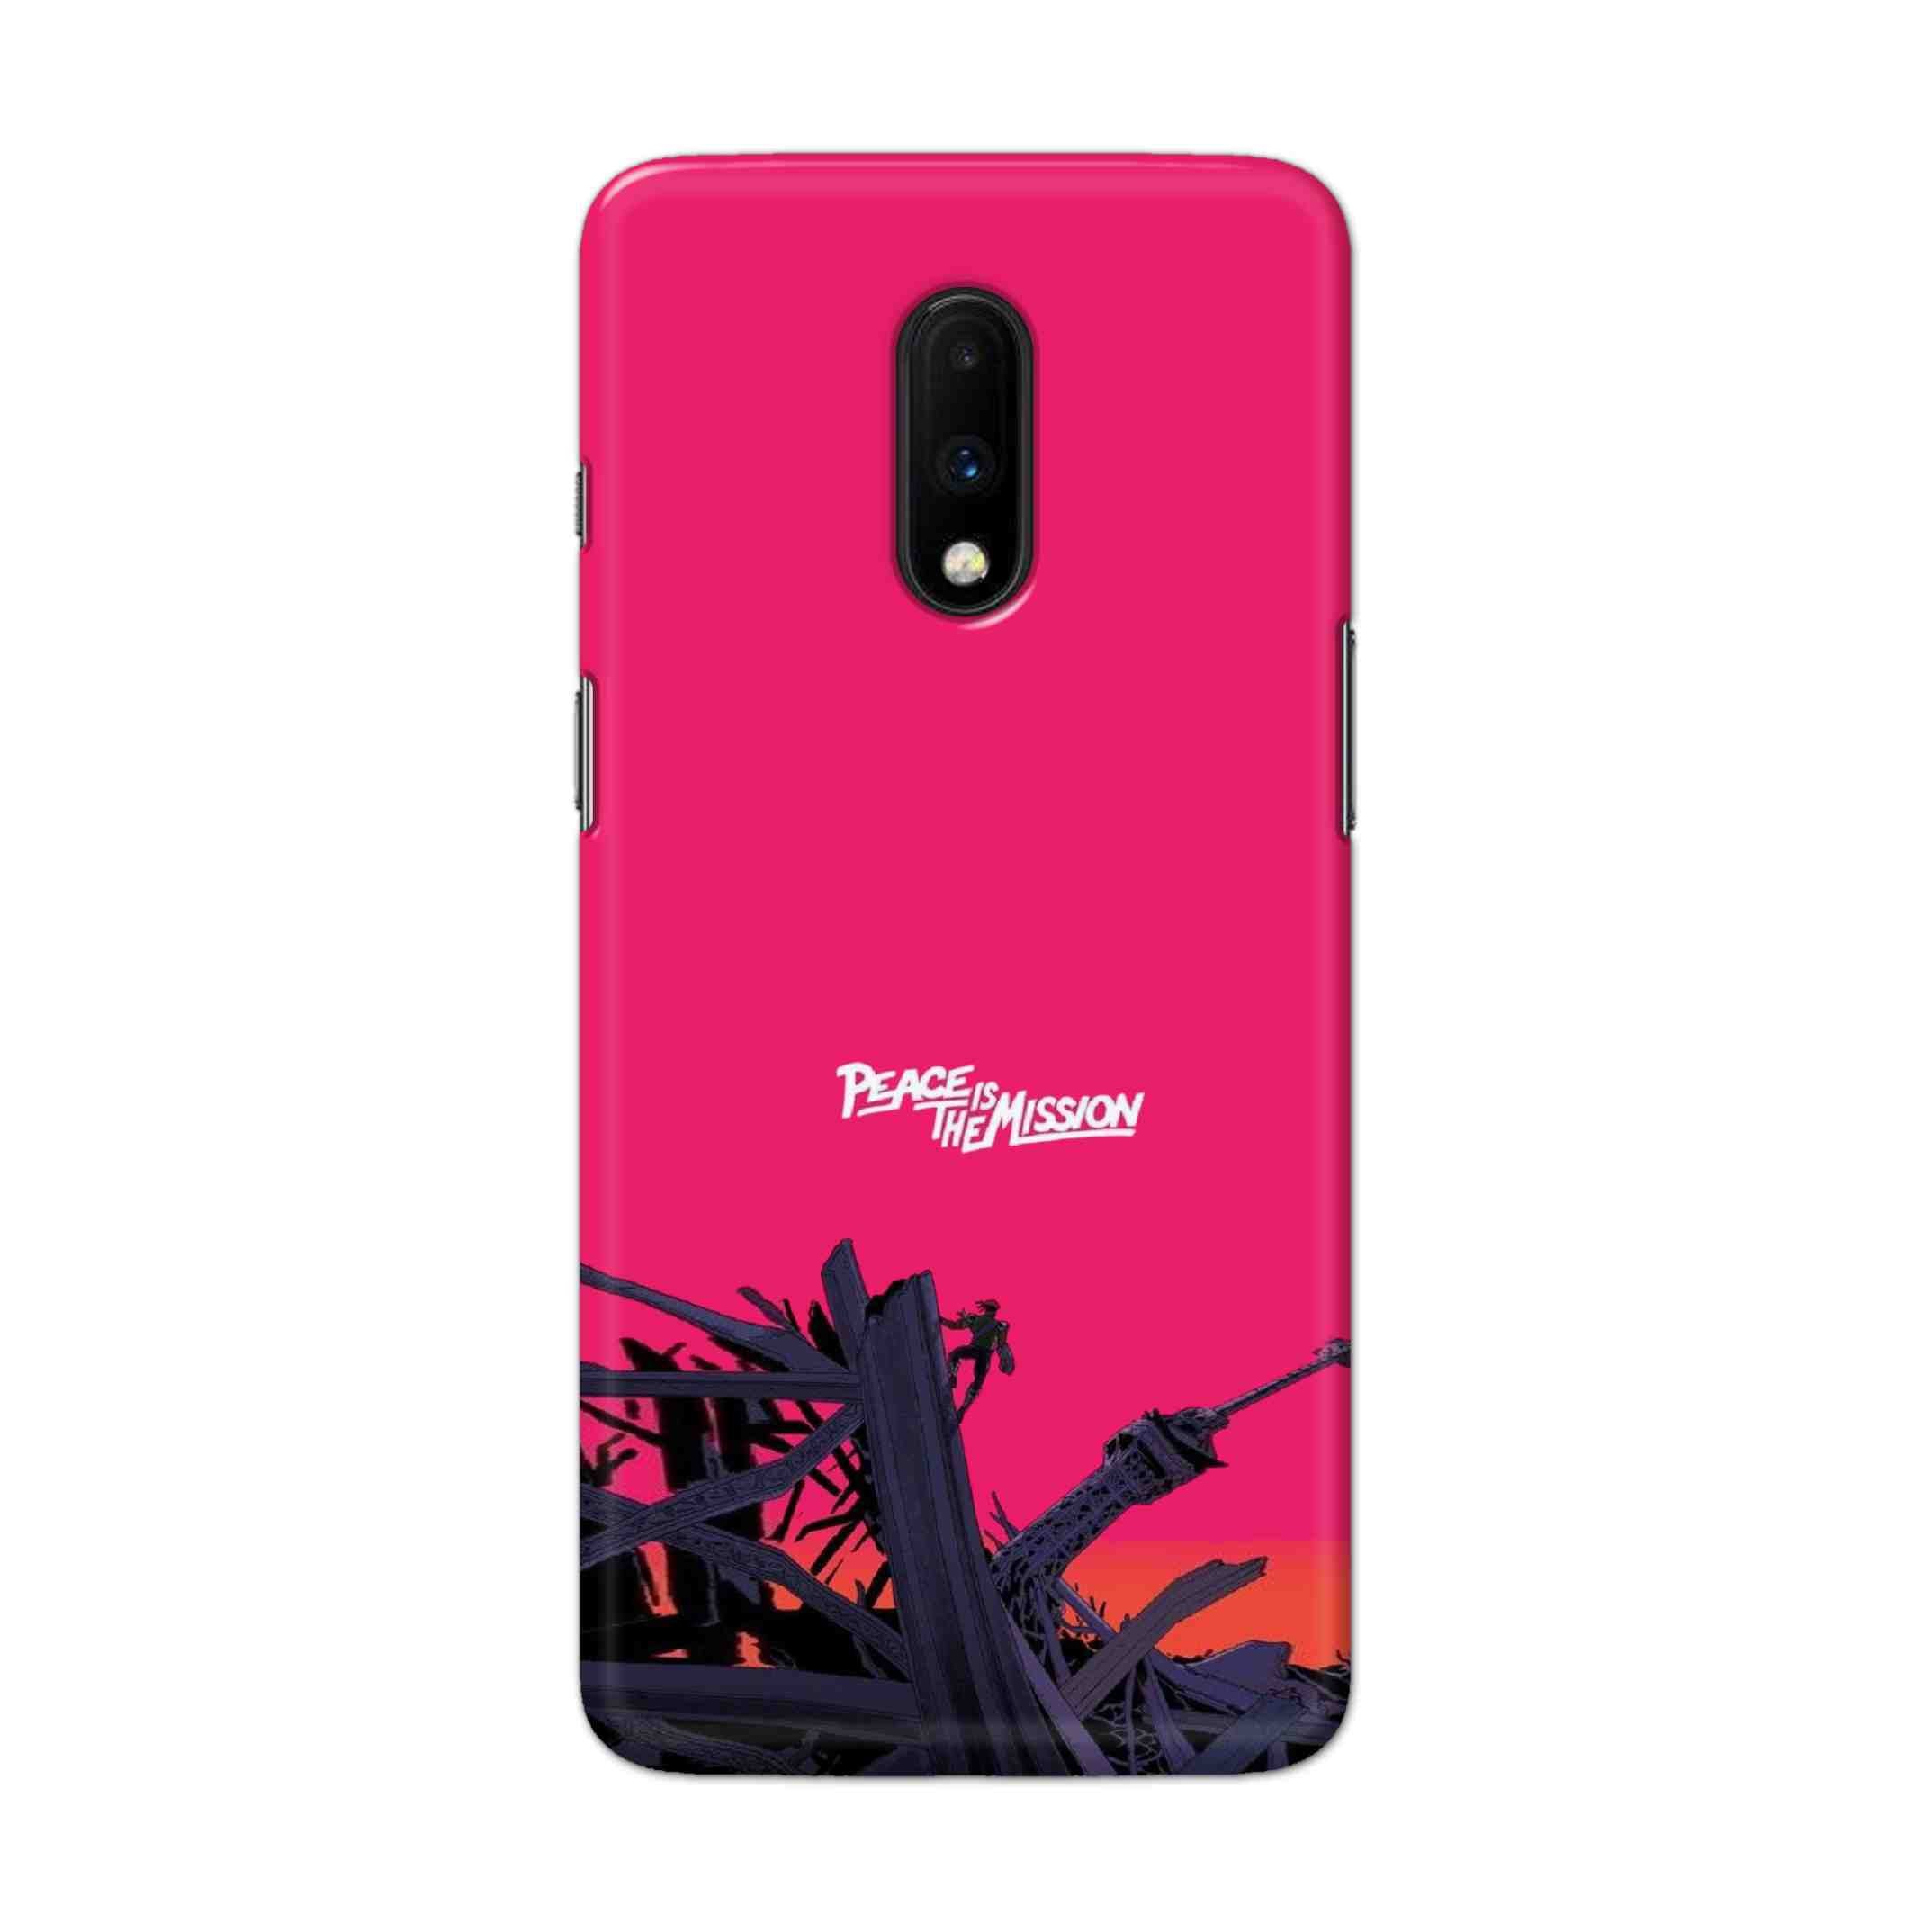 Buy Peace Is The Mission Hard Back Mobile Phone Case Cover For OnePlus 7 Online